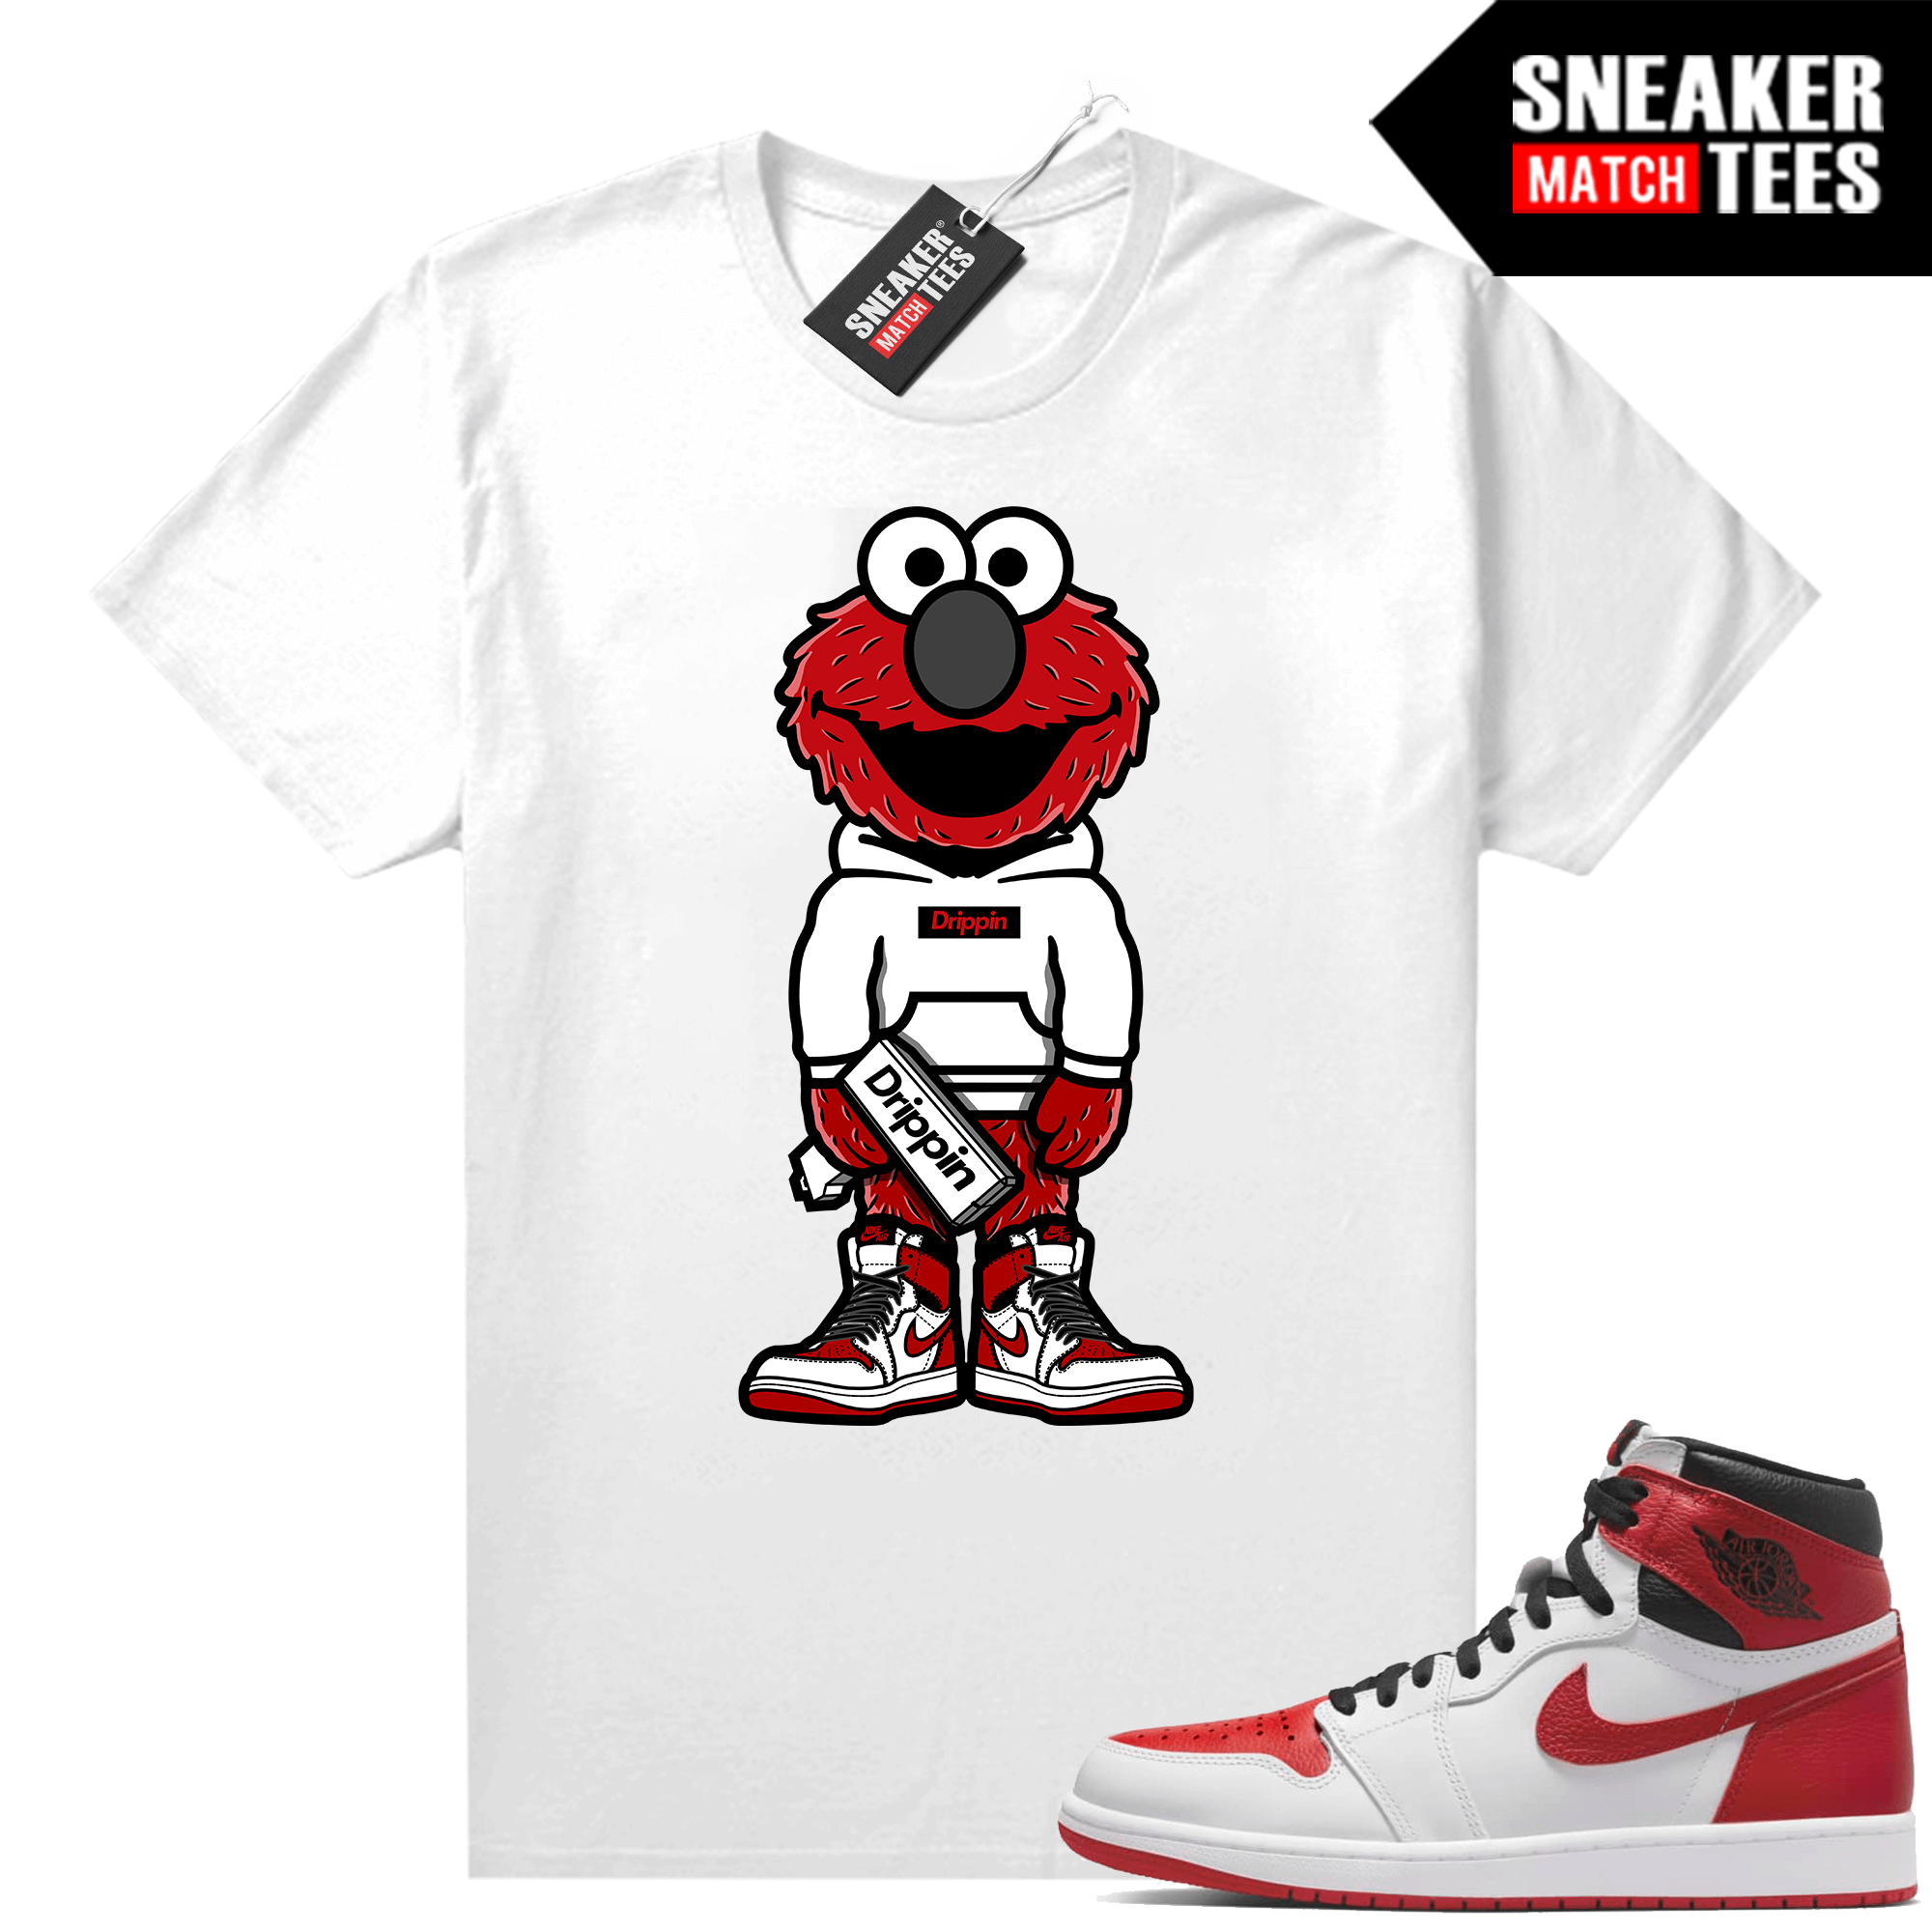 Heritage 1s youre Match Tees White Drippy Elmo